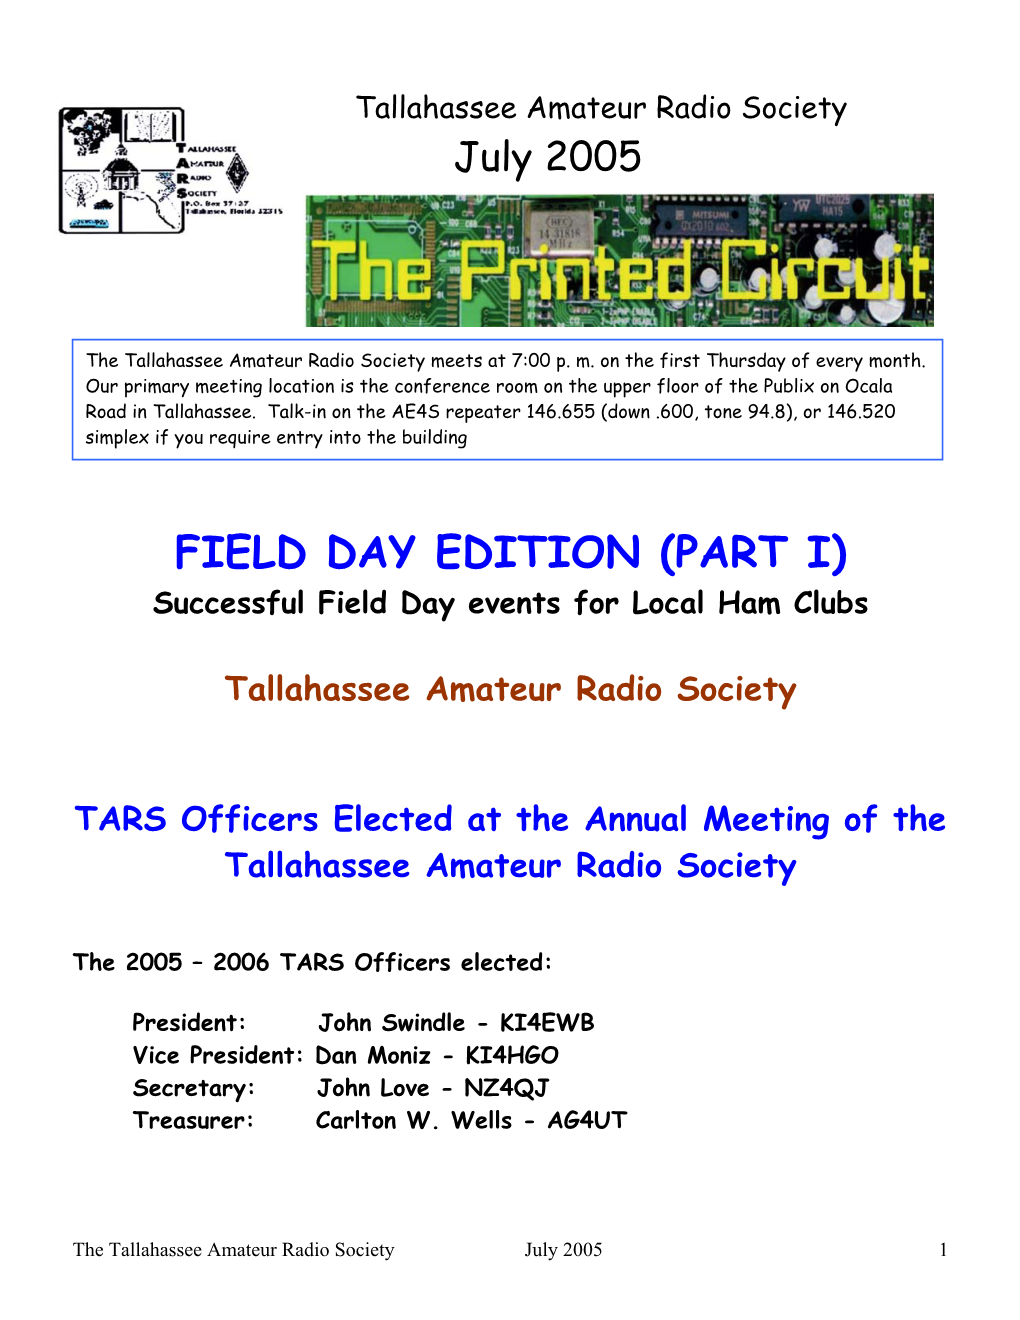 PART I) Successful Field Day Events for Local Ham Clubs